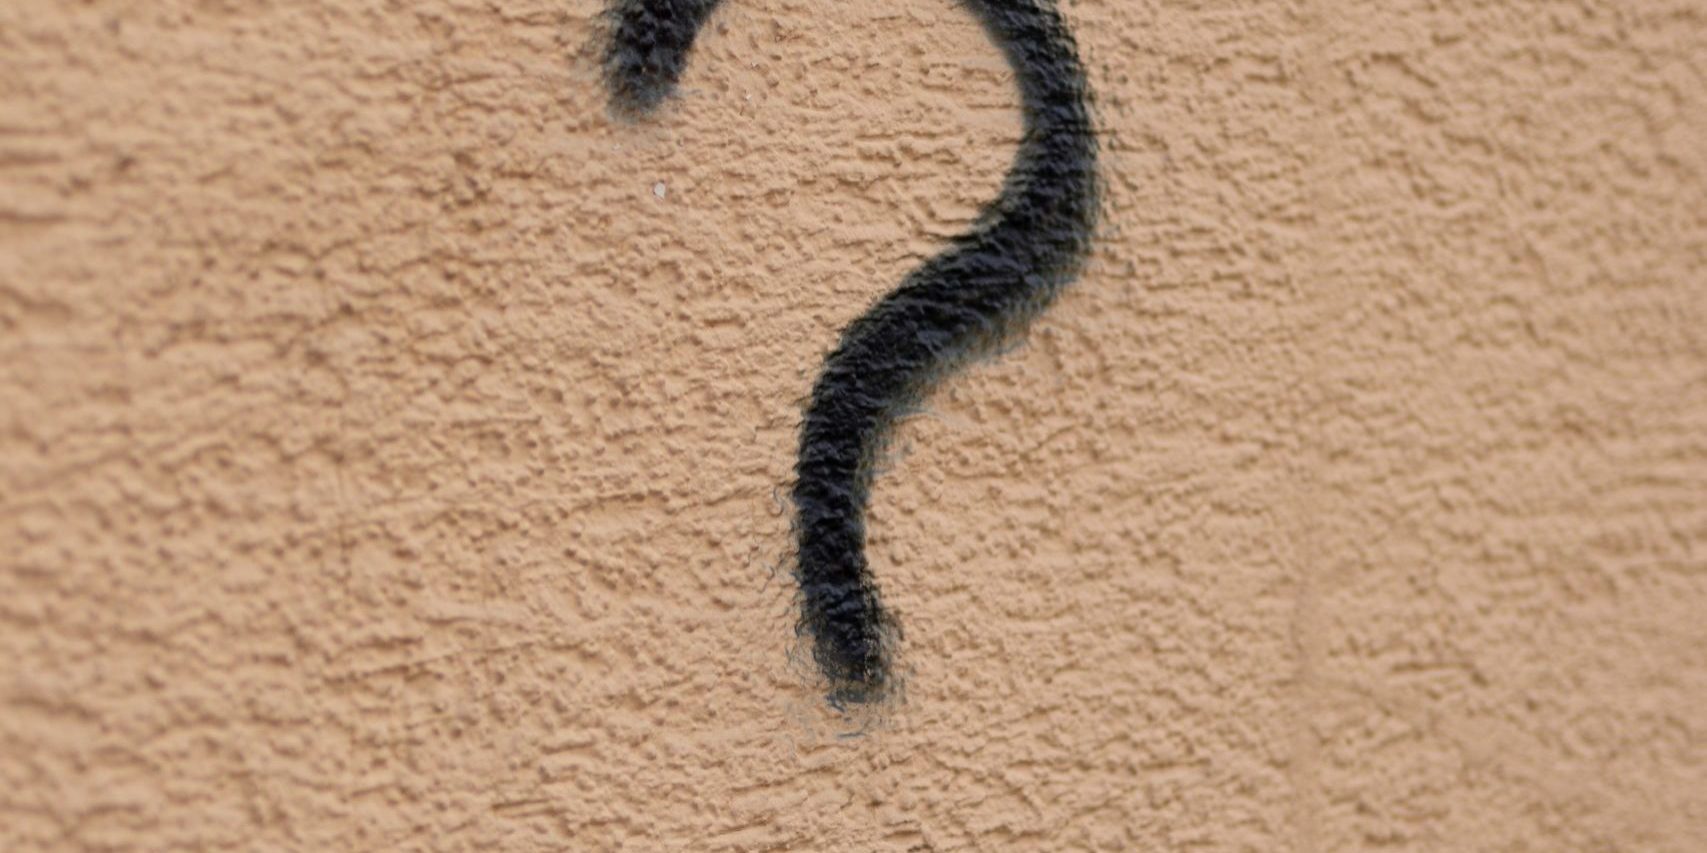 Black question mark on a brown background